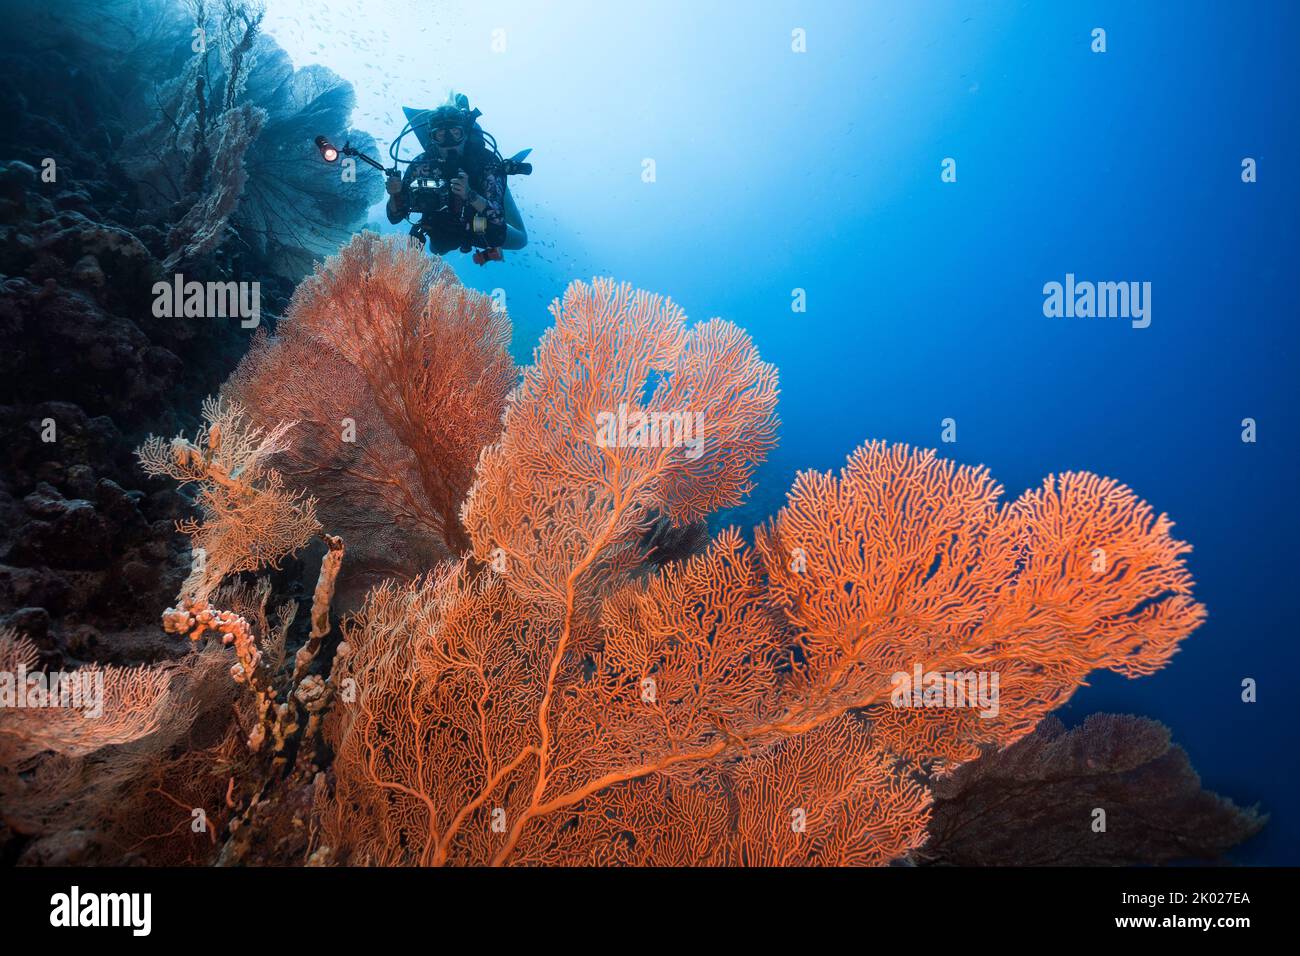 A Giant sea fan (Anella mollis) with a scuba diver in the background holding a camera Stock Photo